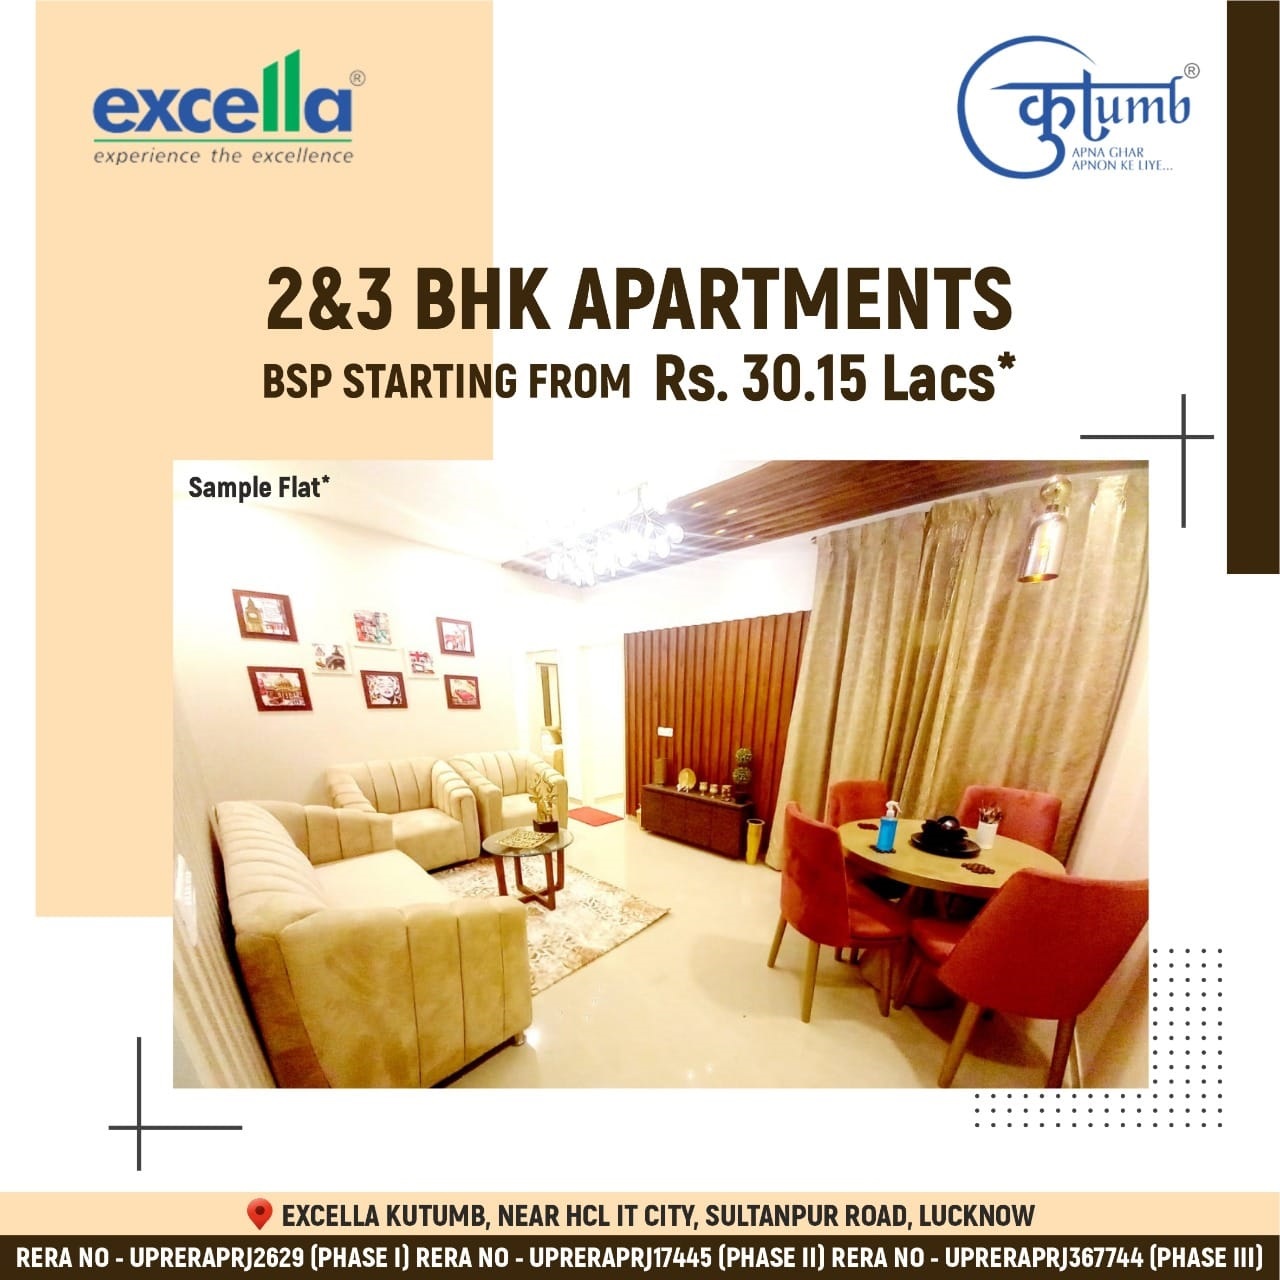 Book 2 & 3 BHK apartments BSP starting from Rs. 30.15 Lac at Excella Kutumb in Gomti Nagar, Lucknow Update